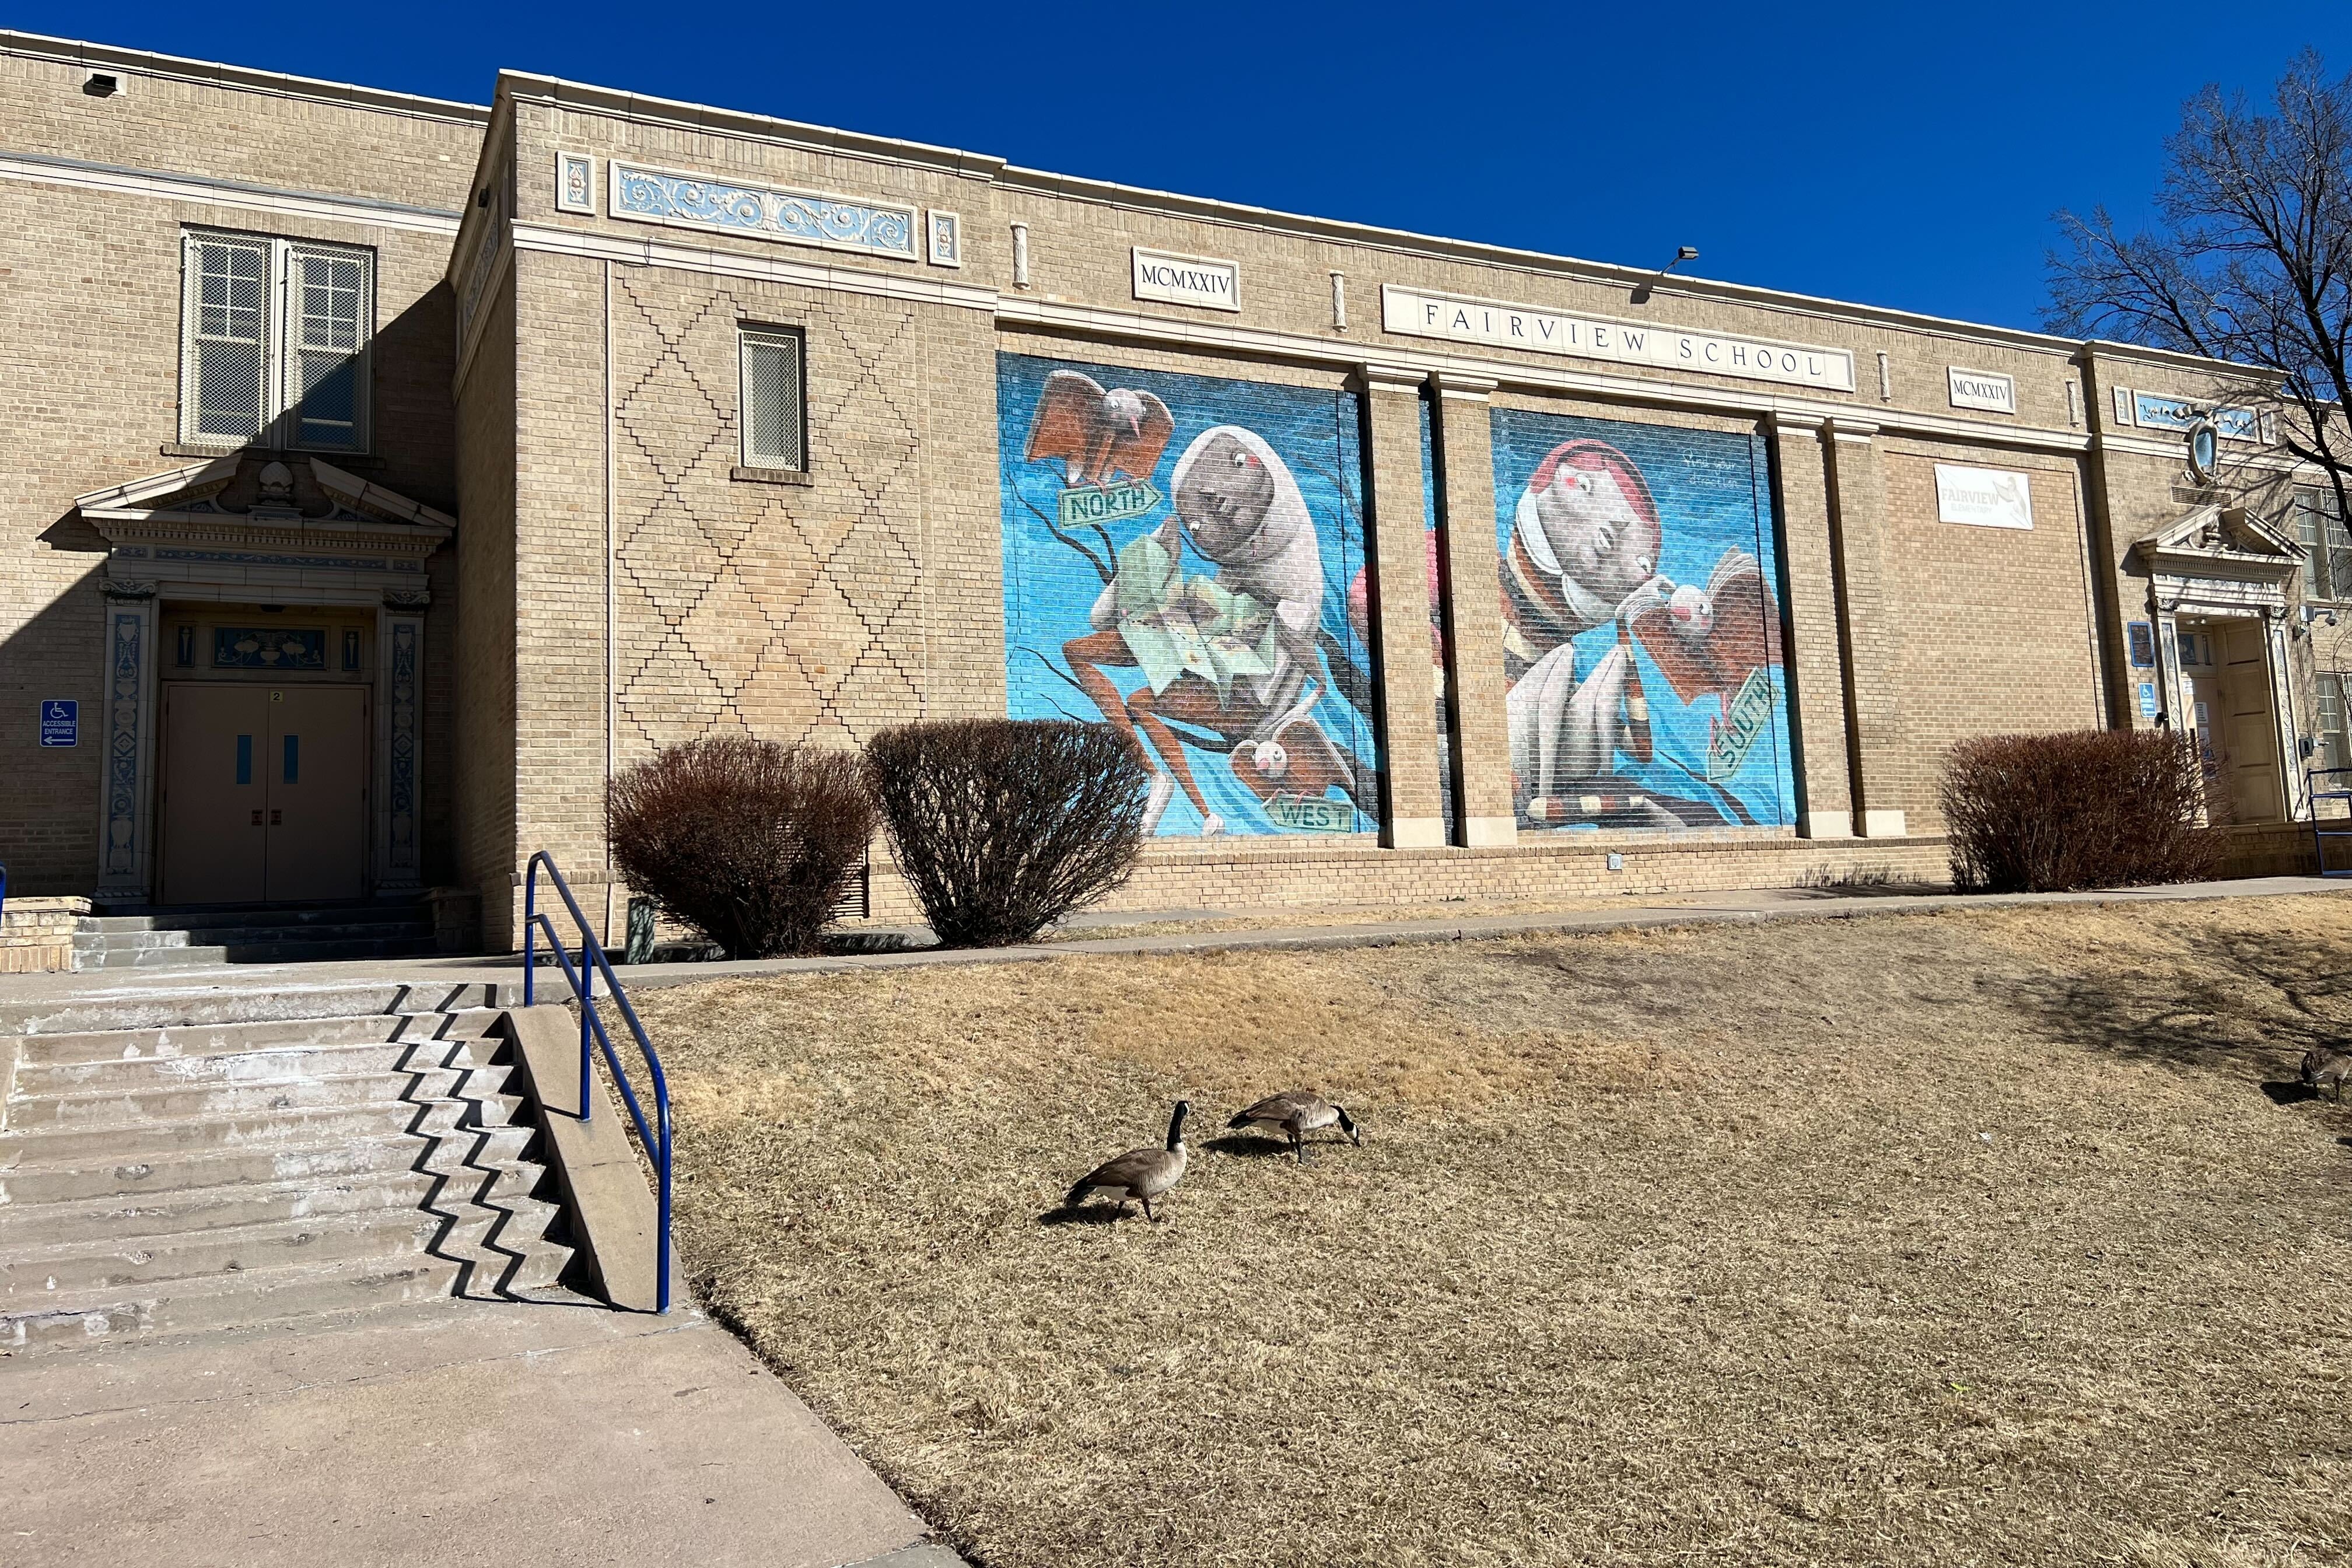 Exterior image of Fairview Elementary shows a short stairway, mosaic tile, and colorful murals.